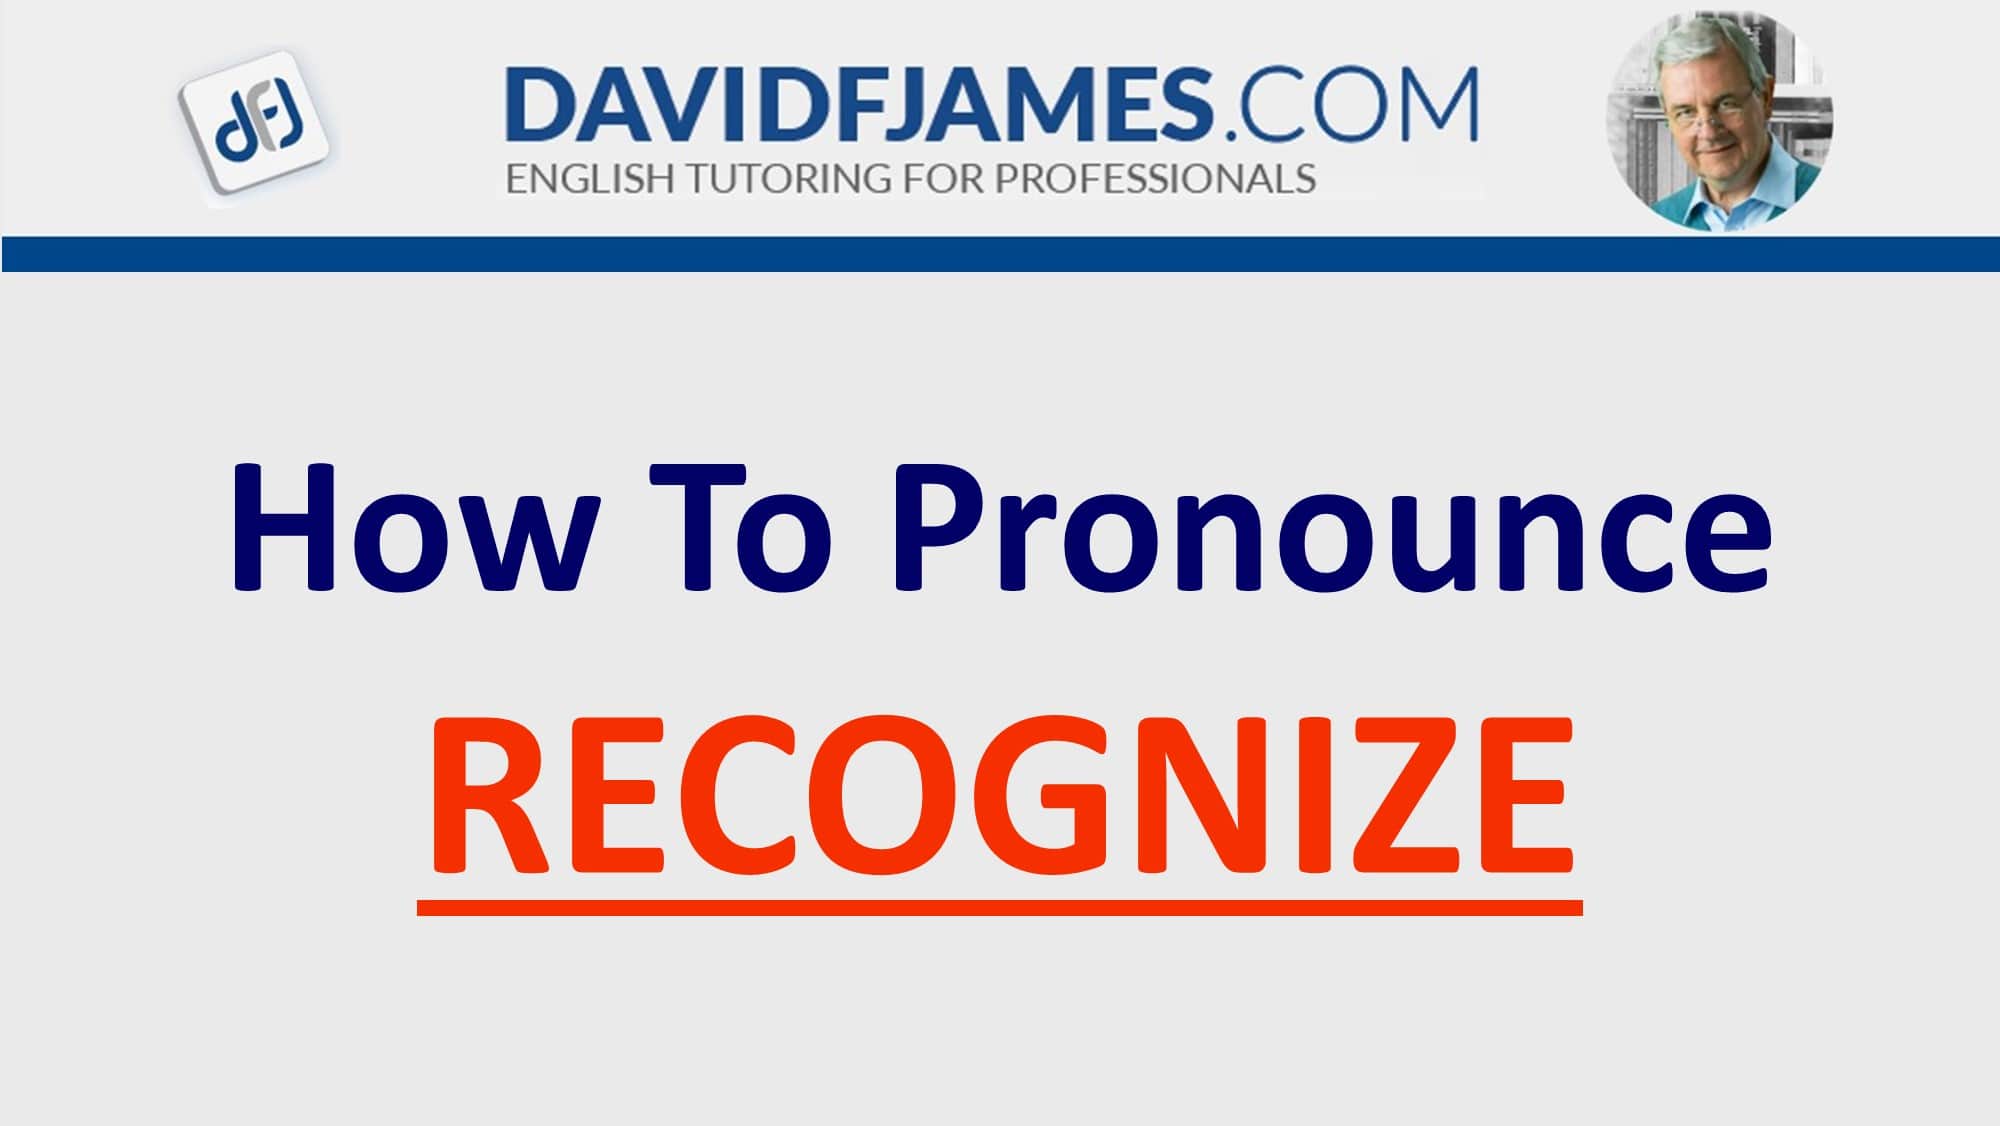 how to pronounce recognize - recognize in a sentence